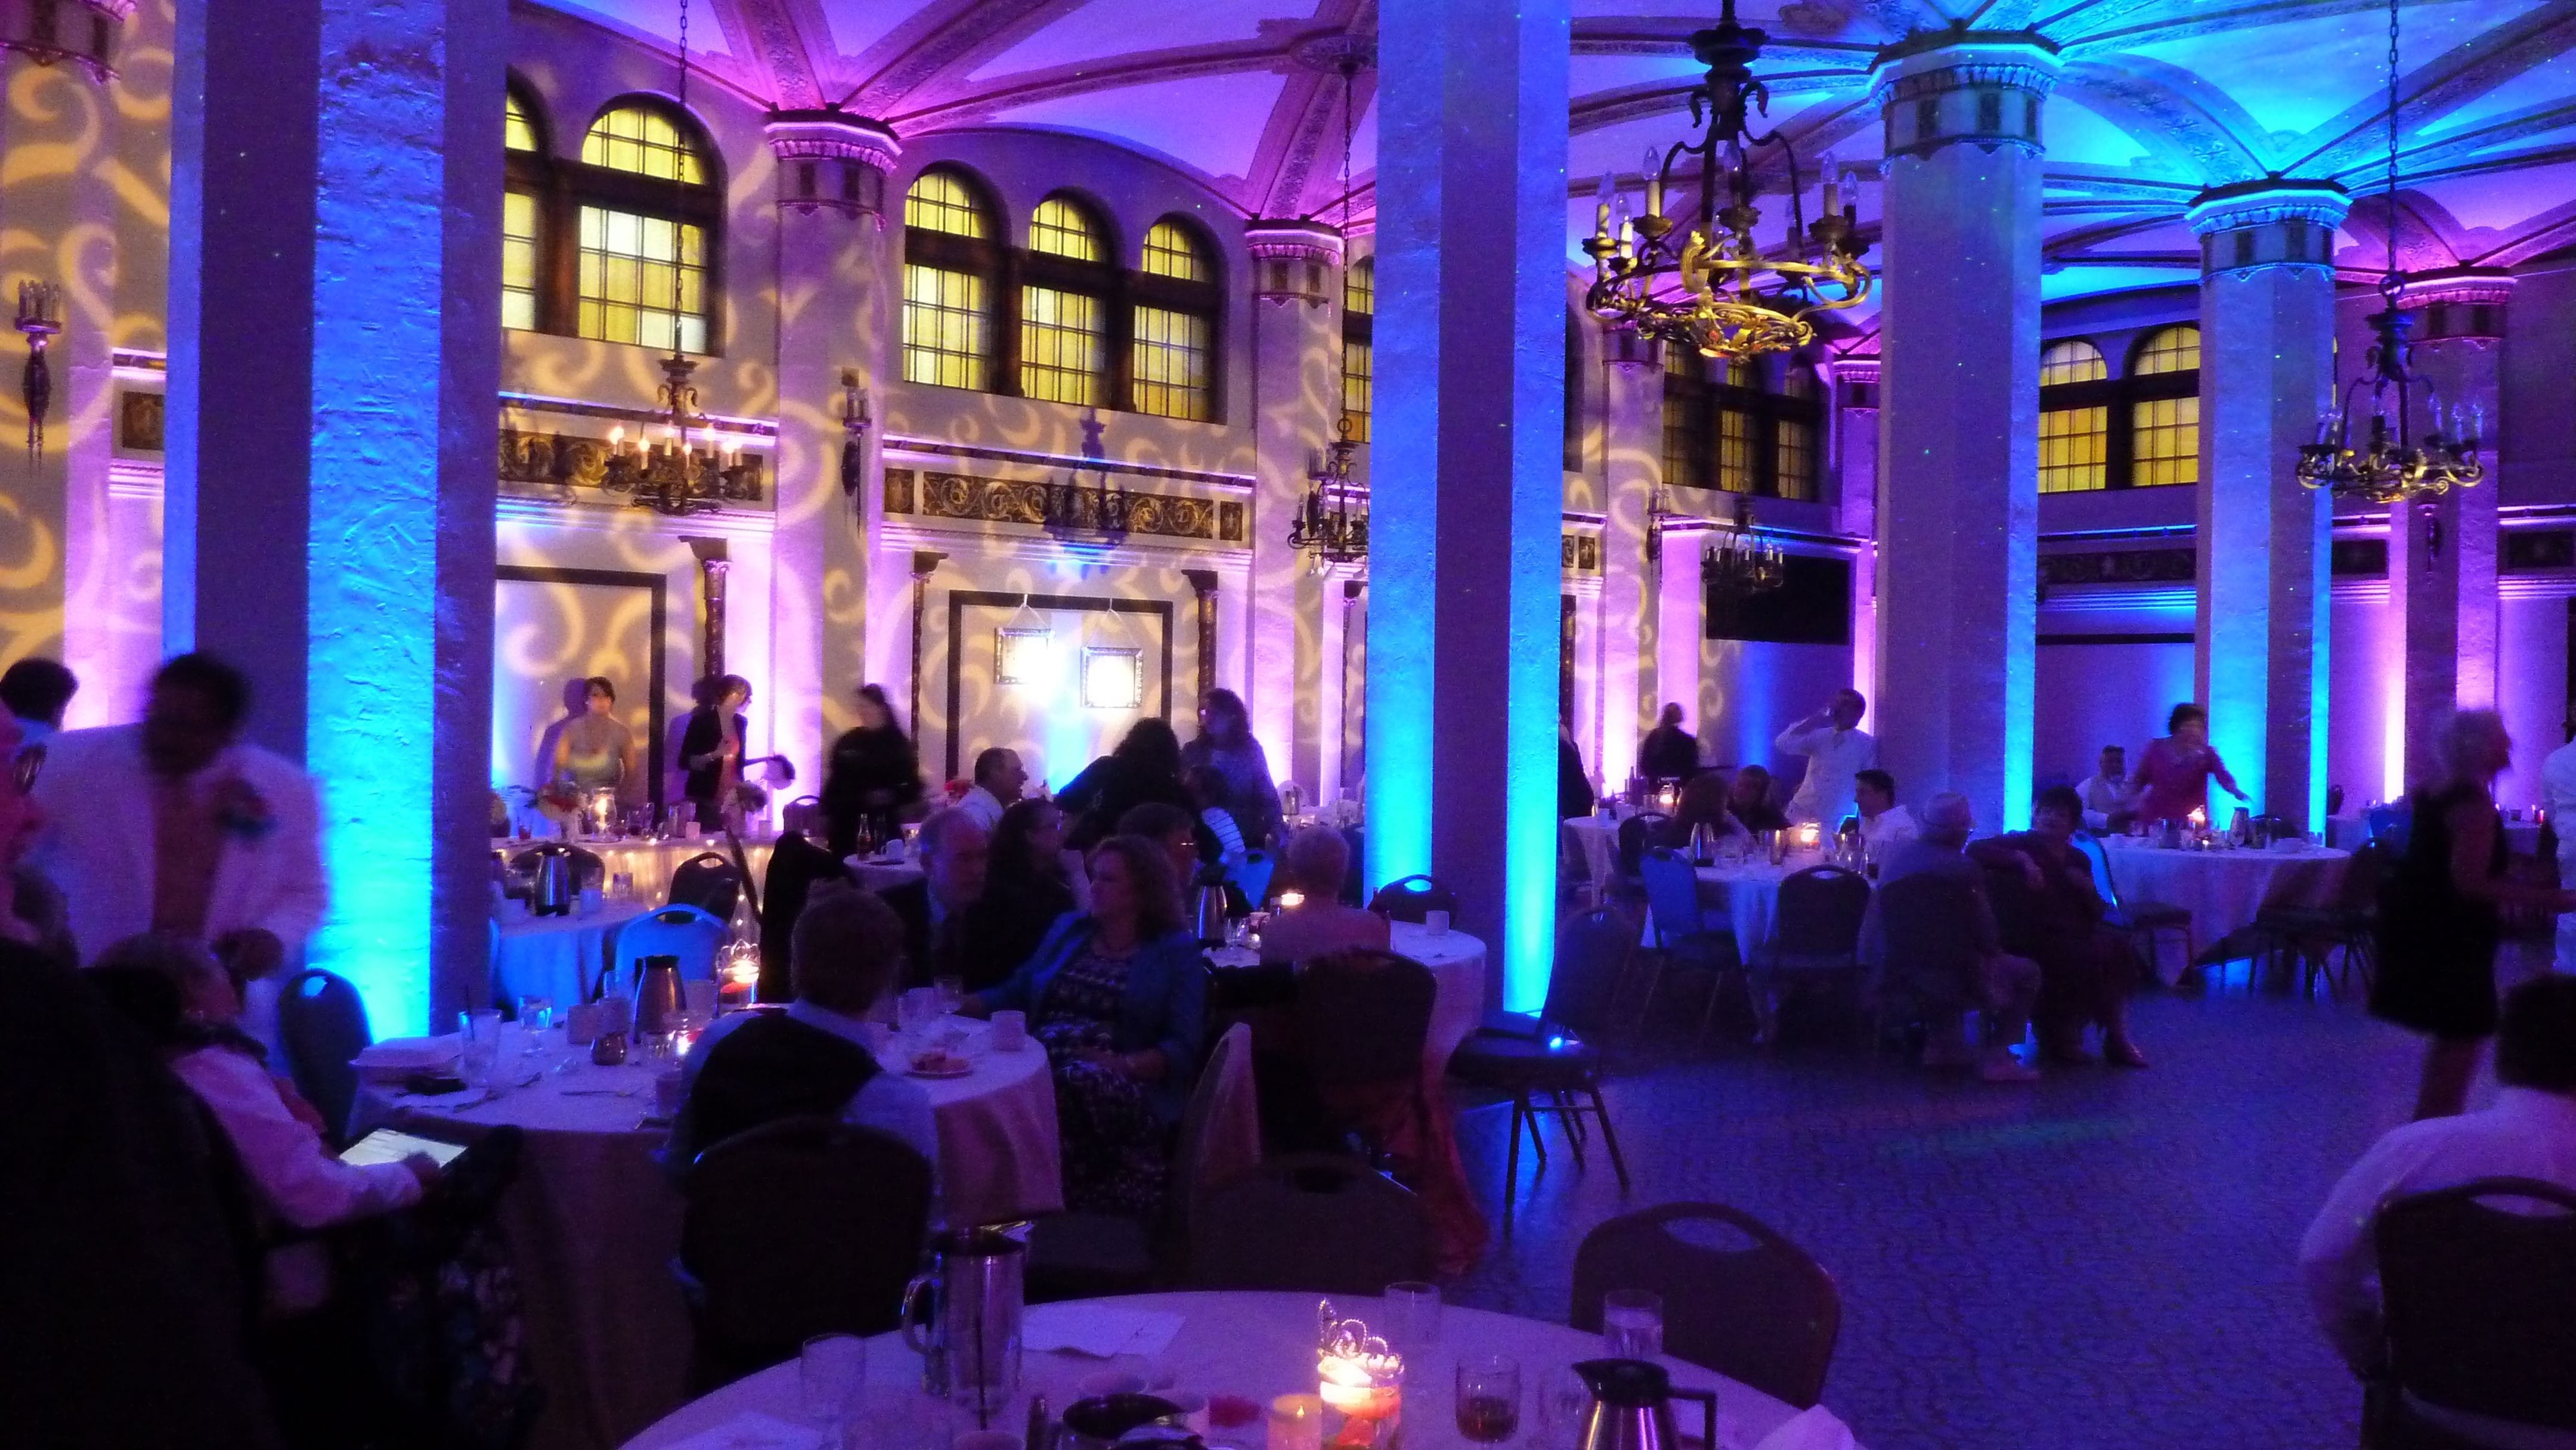 Moorish Room wedding. Up lighting in blue and pink with gobo pattern on wall.